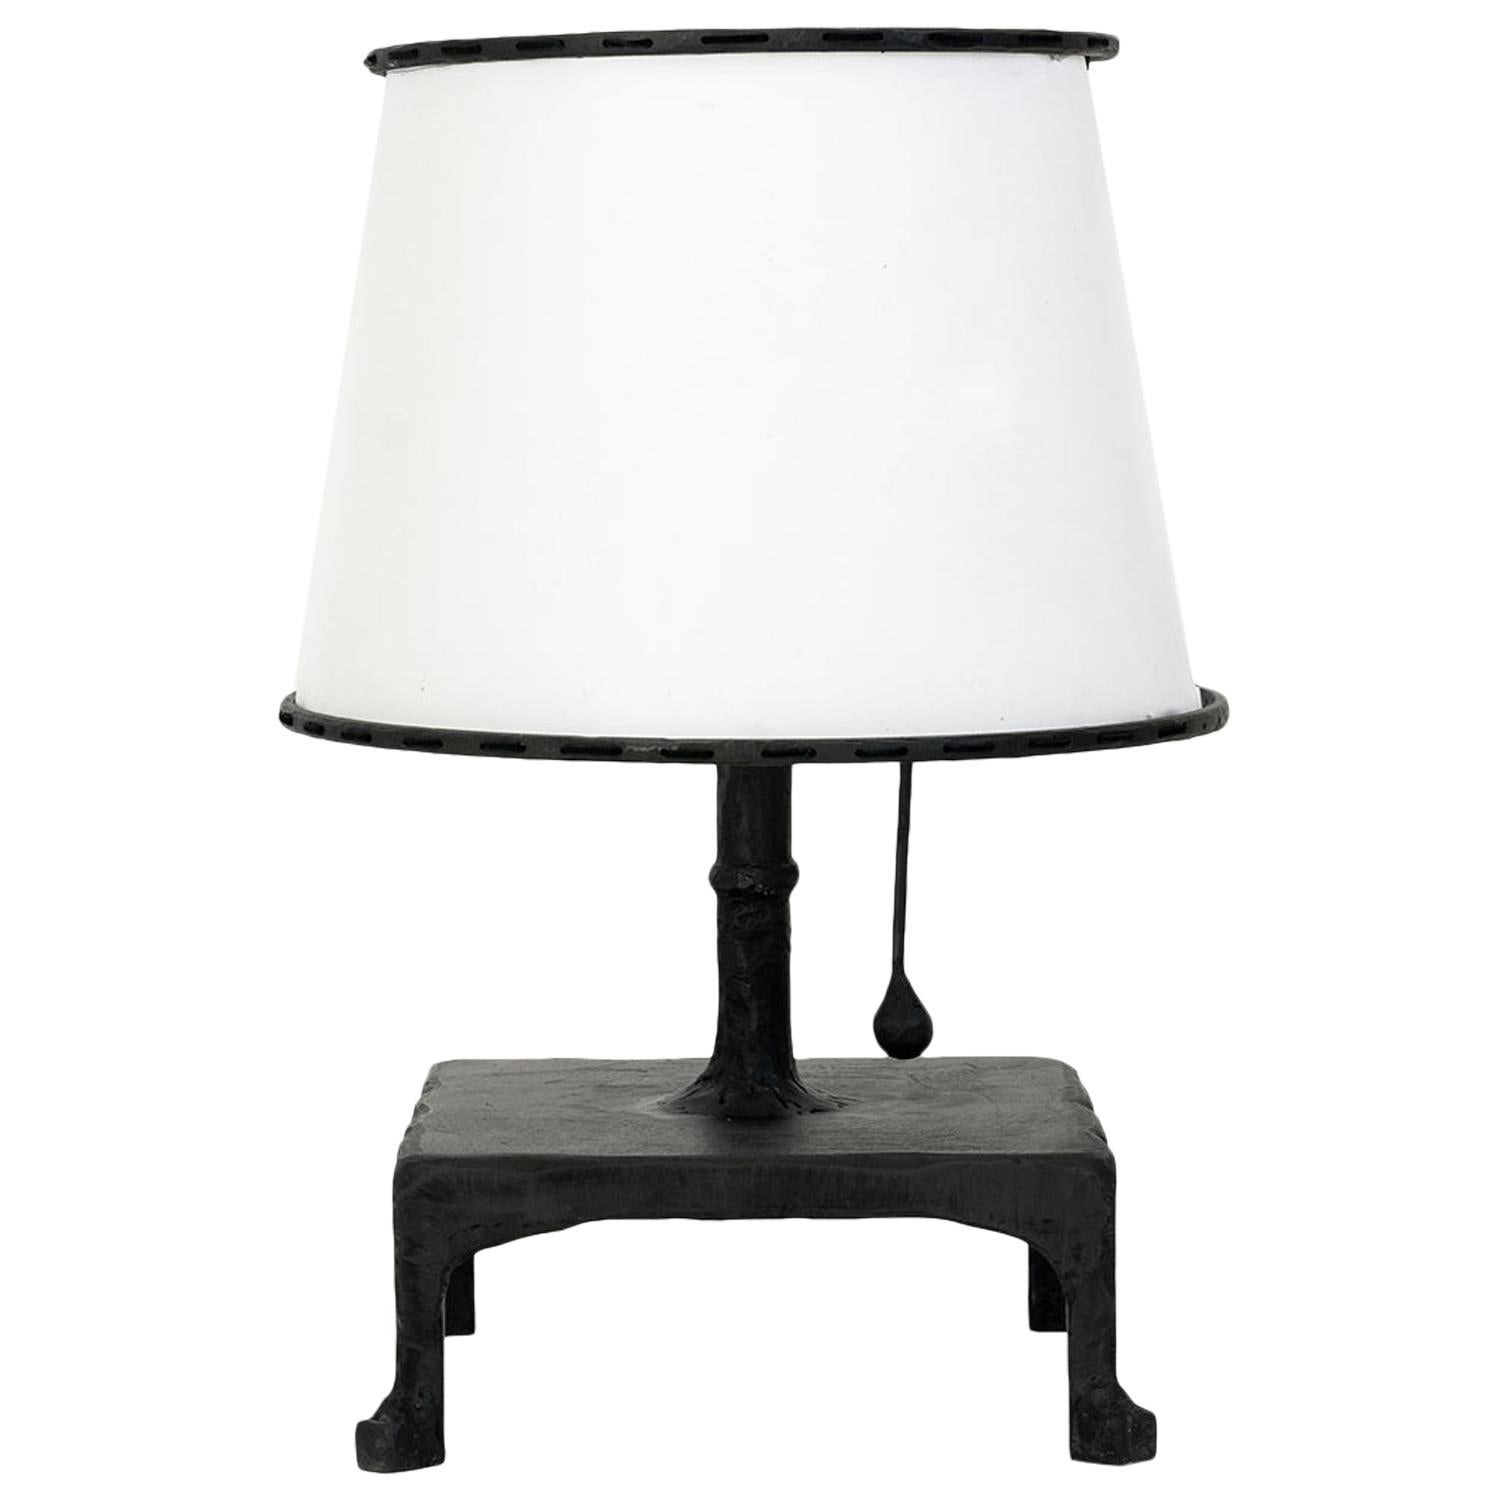 Classic Contemporay Hand-Sculpted Blackened Steel Table Lamp and Linen Shade